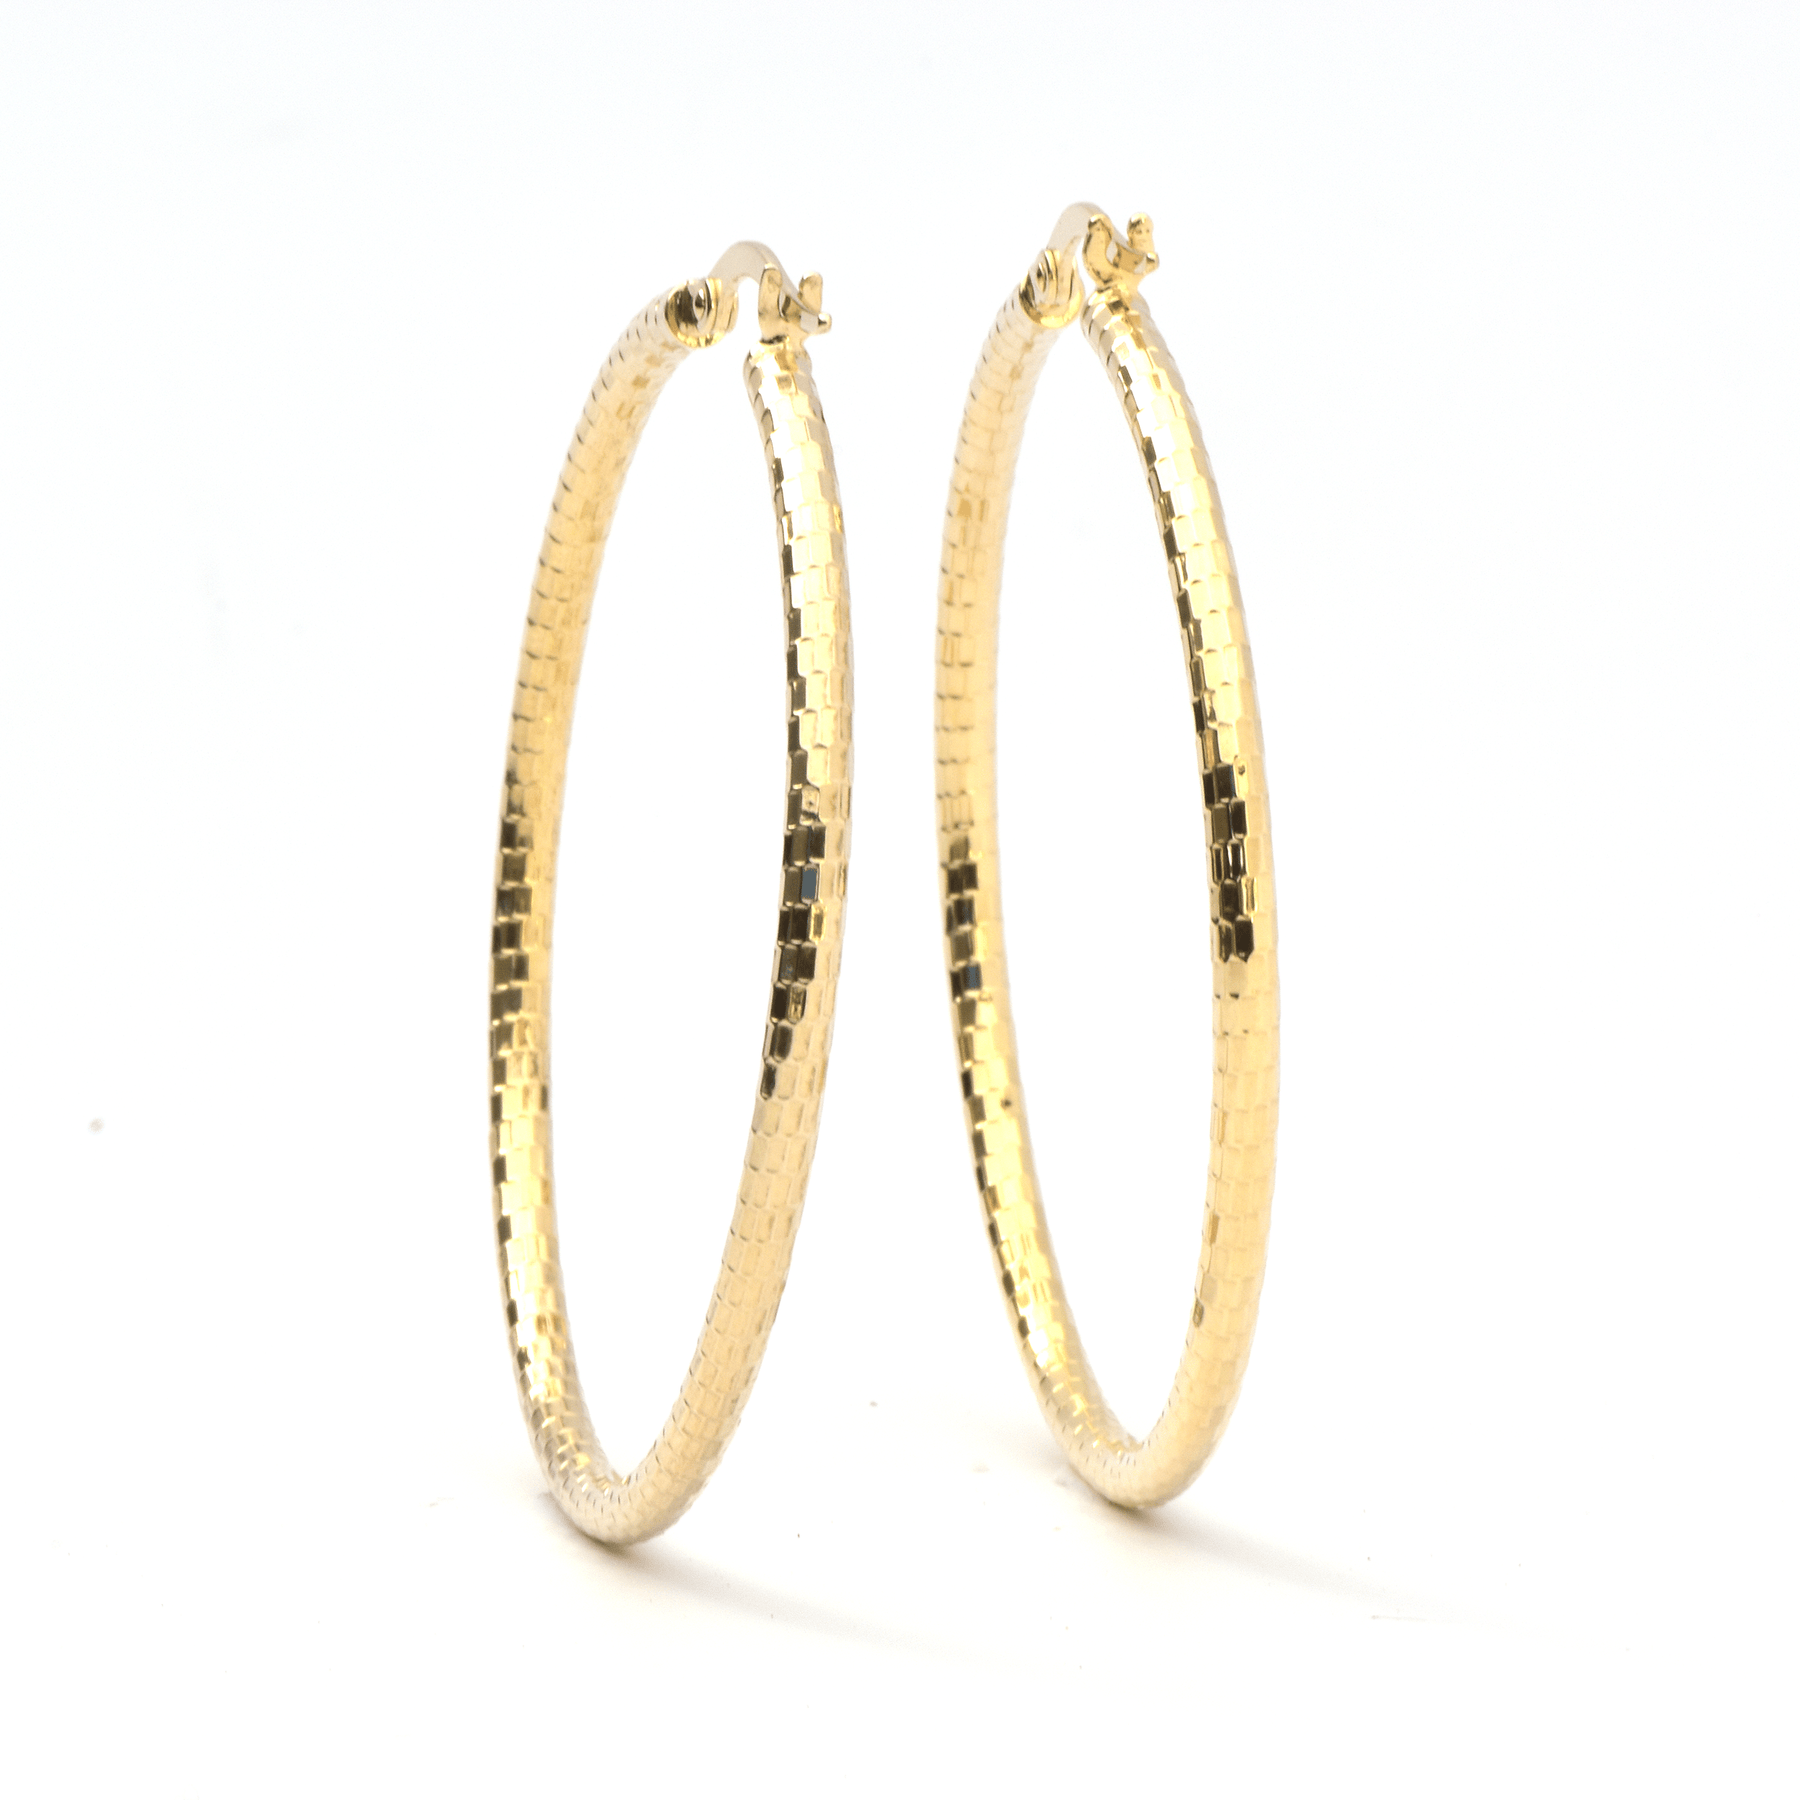 14k Solid Yellow Gold Extra Large Hoop Earrings XL Classic Hoops Everyday  Big Hoop Earrings Gifts for Her, 2 X 70mm Big Hoops - Etsy